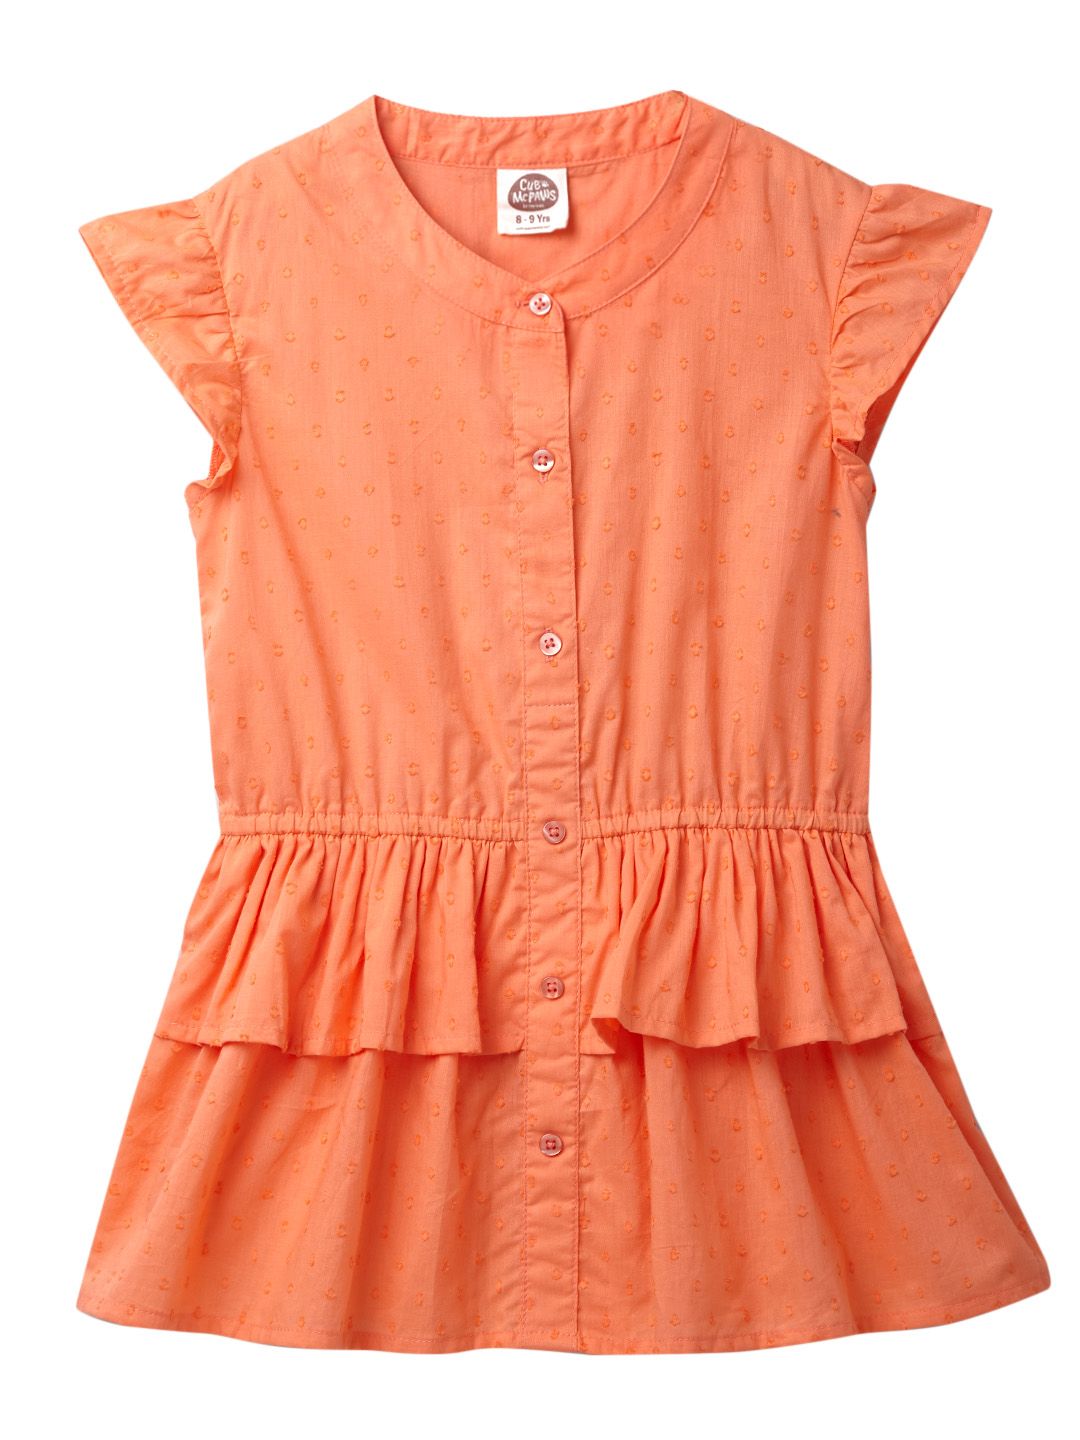 Orange Fashion Woven Top for Girls Age 4 to 12 Years